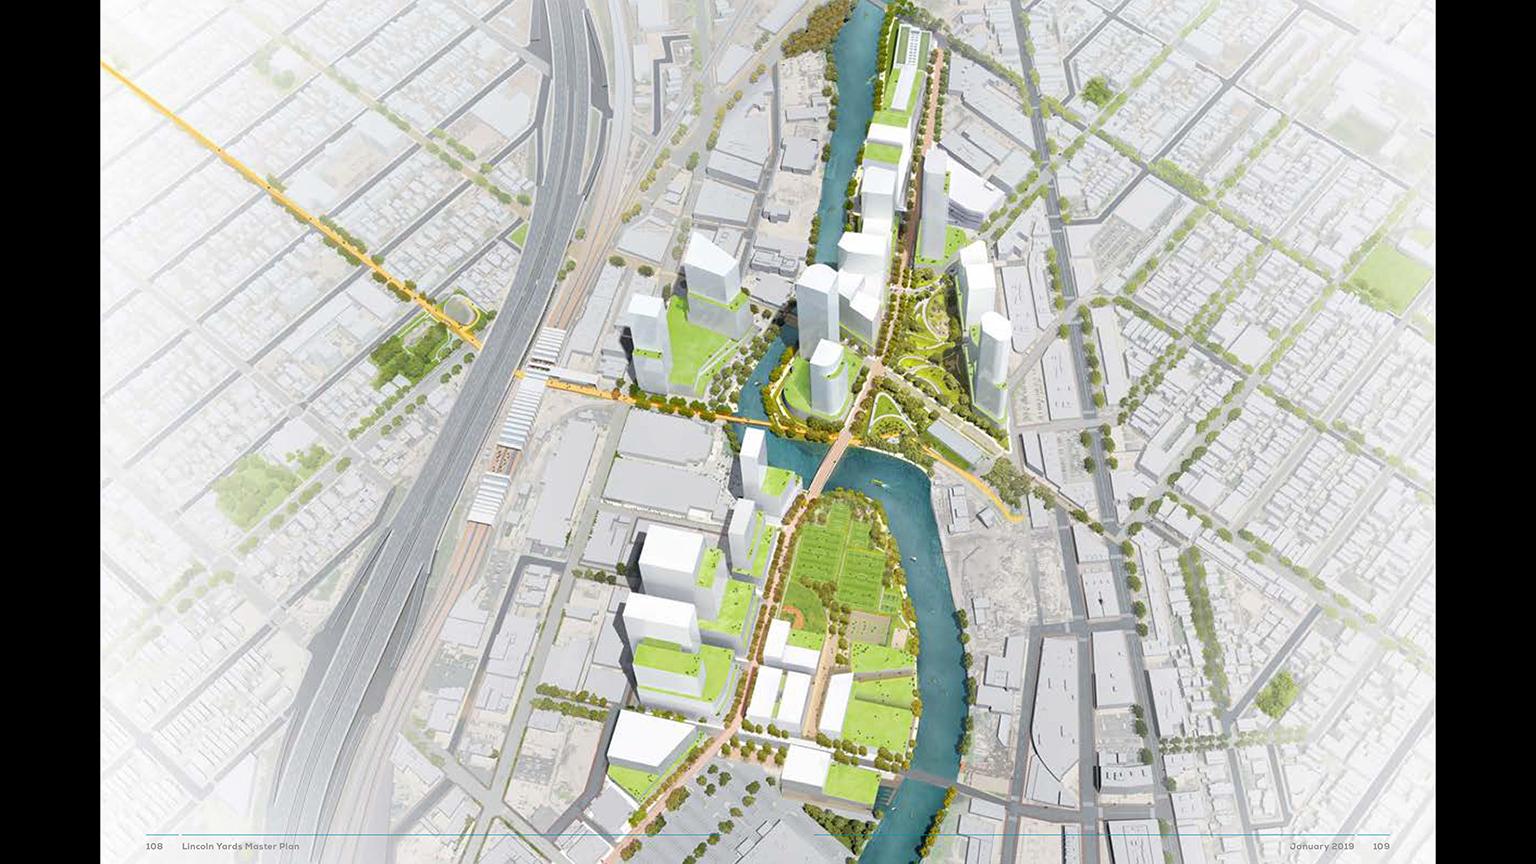 An artist’s rendering of the Lincoln Yards master plan released in January 2019. (Courtesy Sterling Bay)